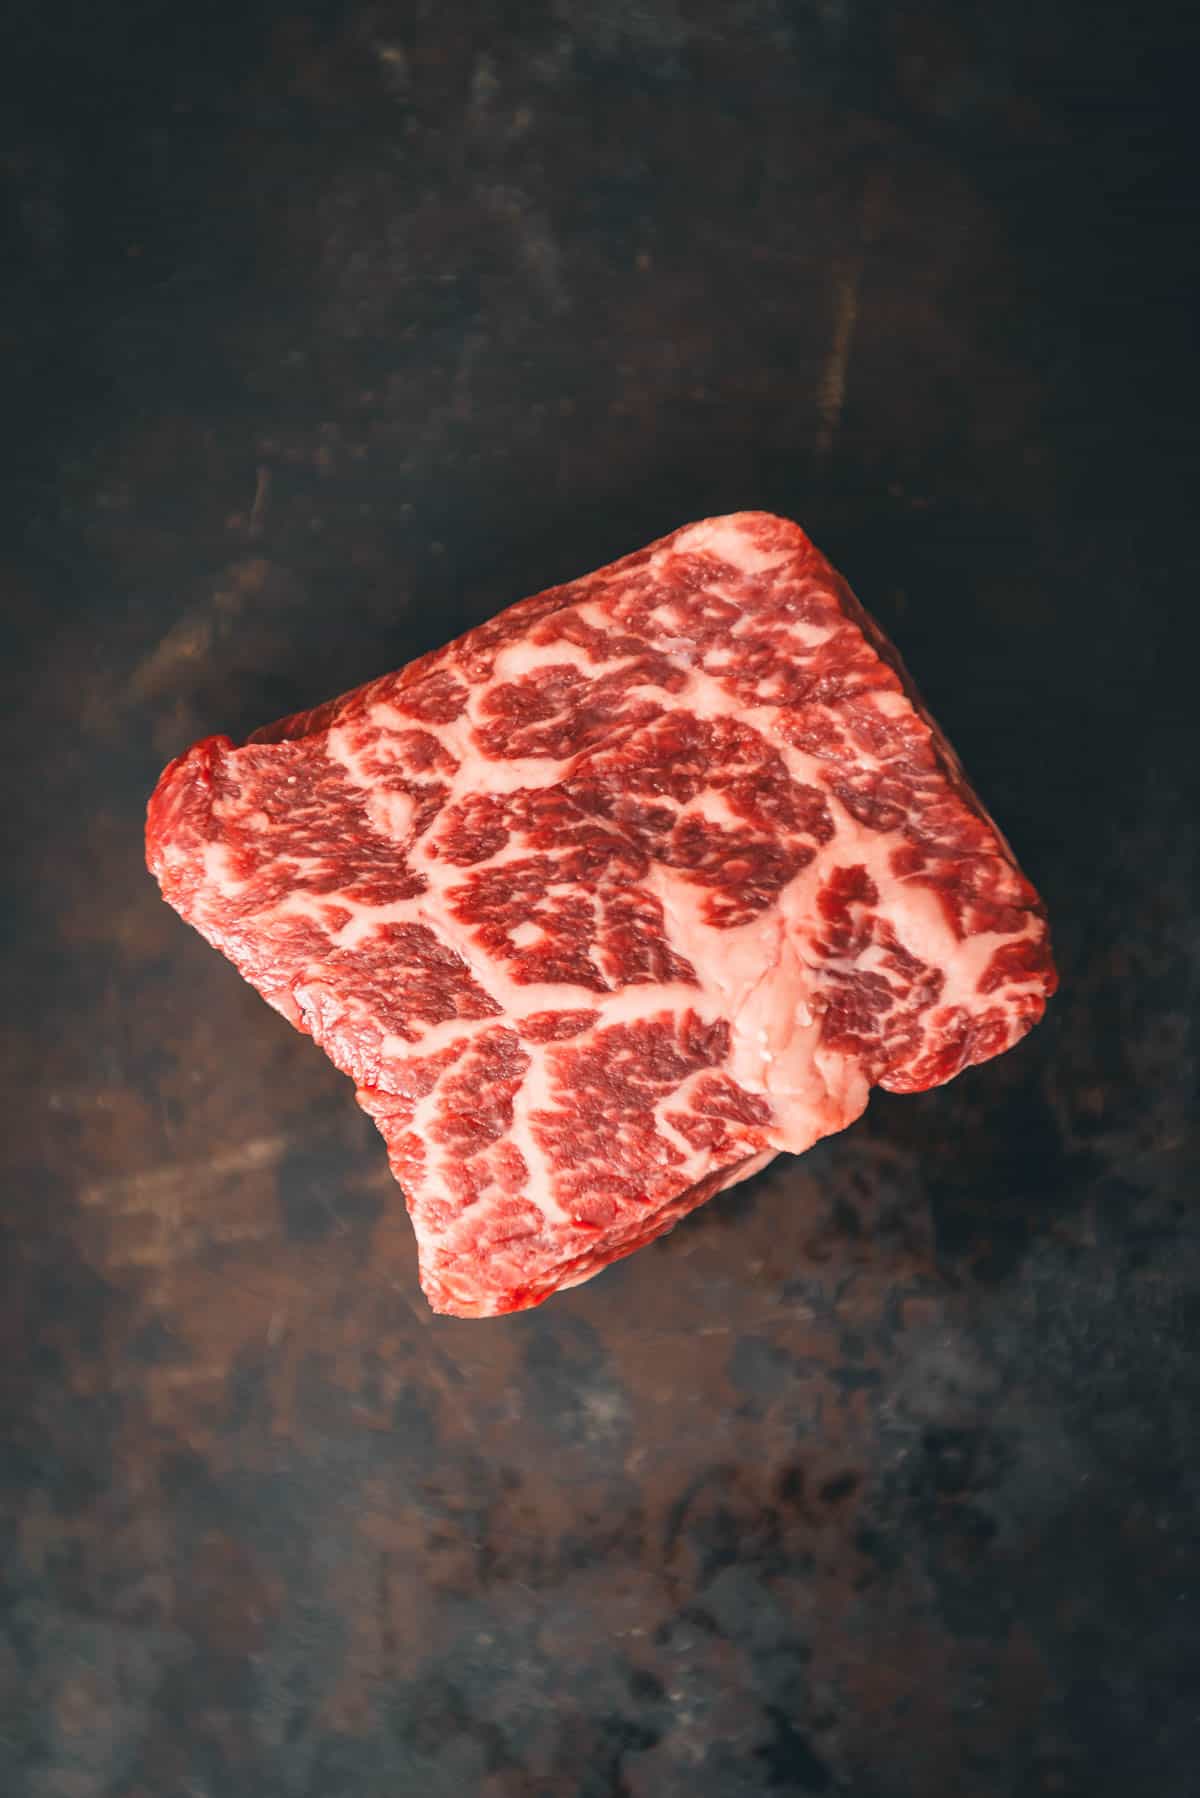 A well marbled of steak on a dark surface.